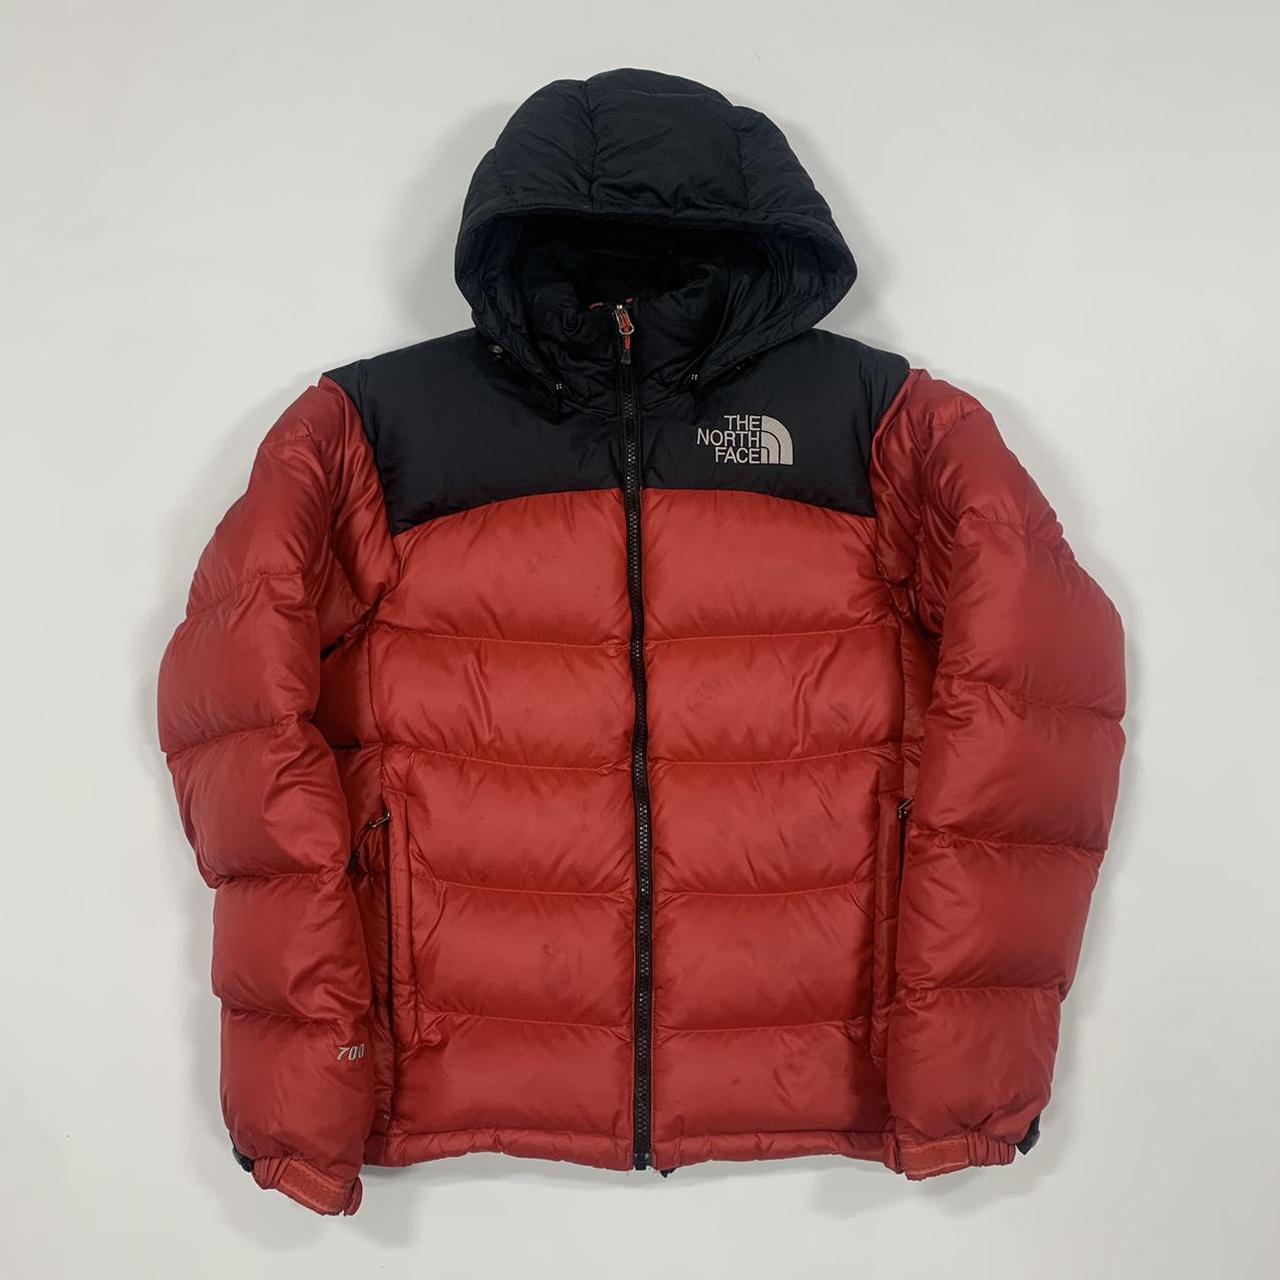 The North Face Men's